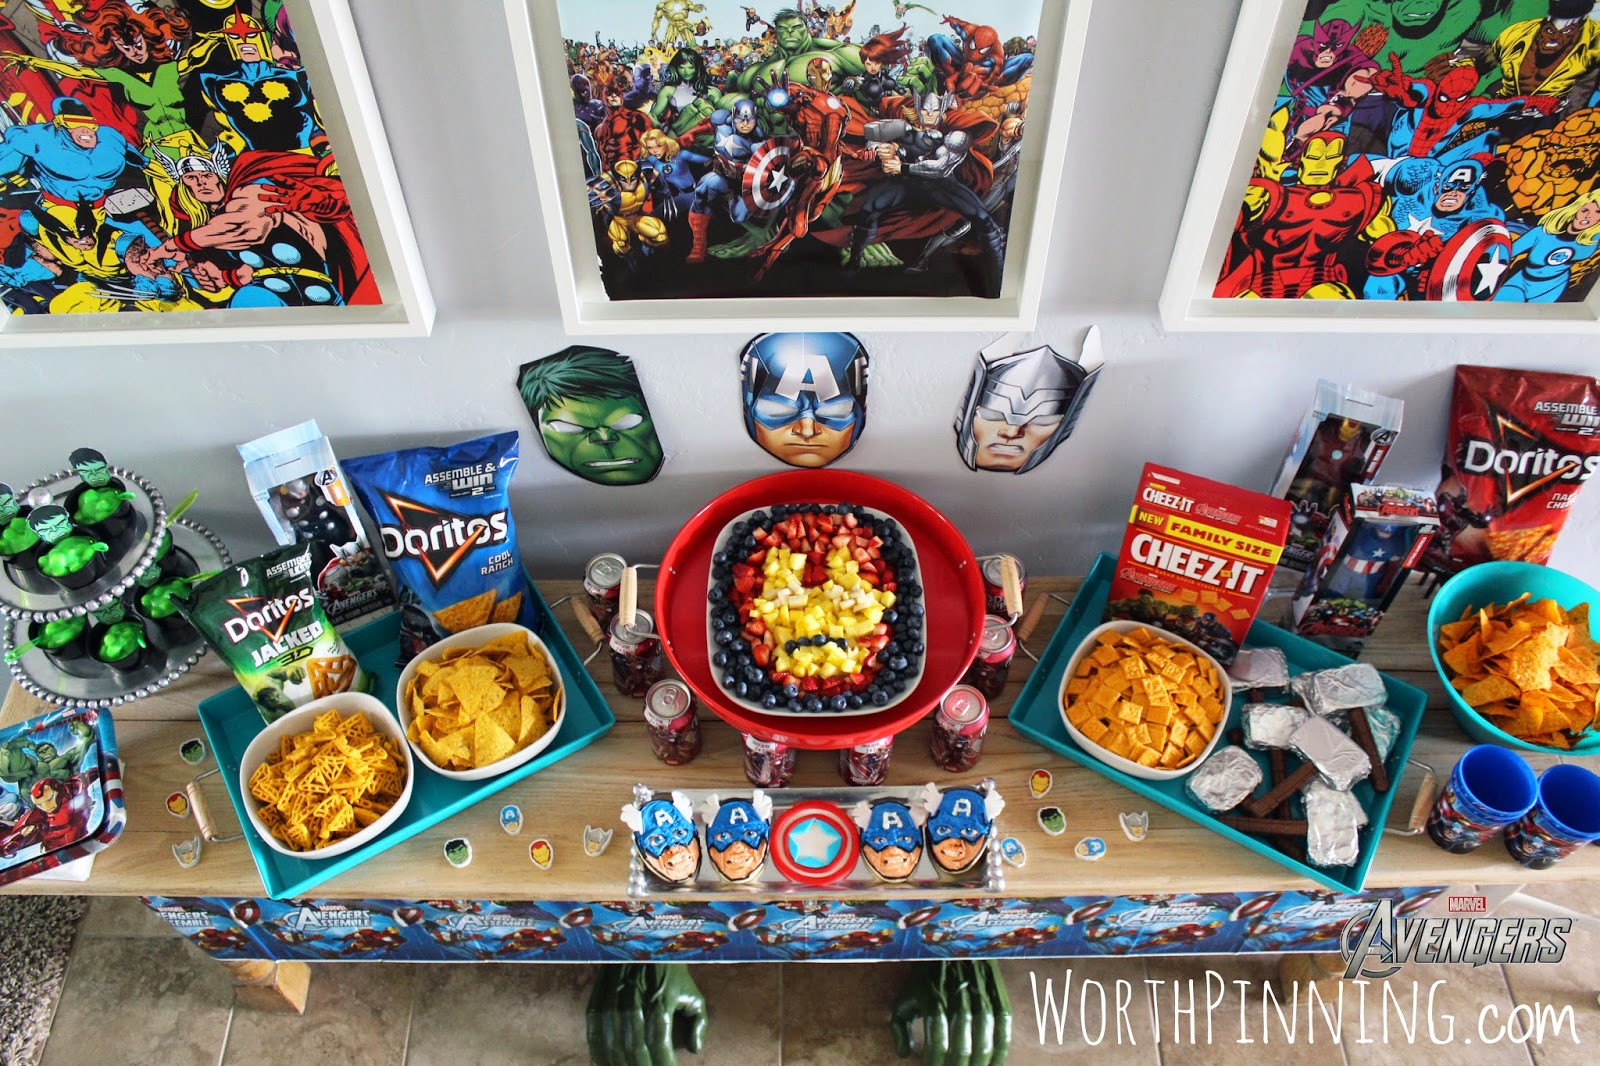 Avengers Themed Birthday Party Ideas
 33 Avengers Theme Party Ideas for Kids